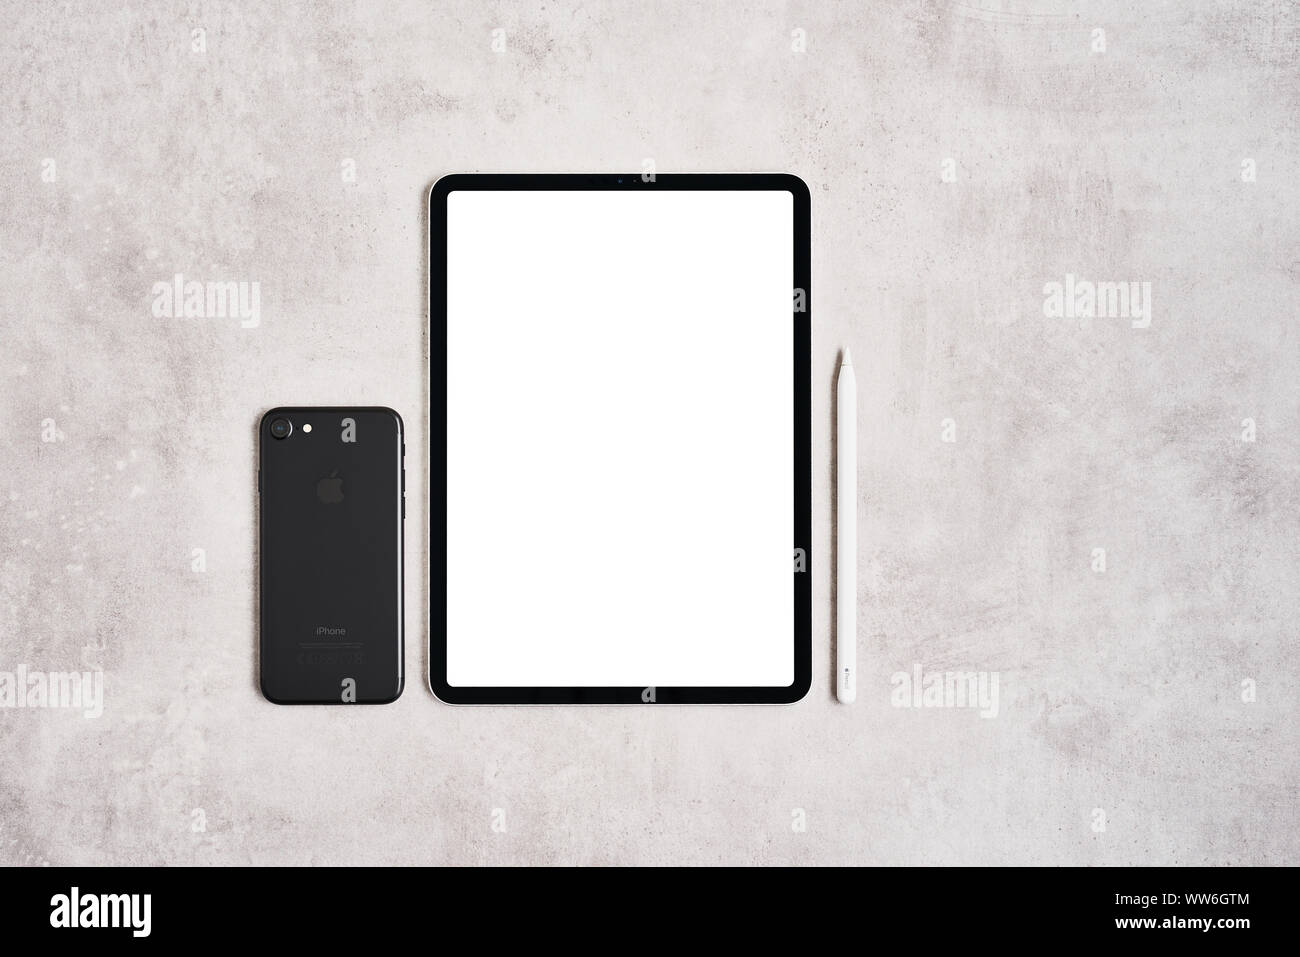 ZAGREB, CROATIA - SEPTEMBER 10, 2019: Top view of Apple iPad Pro, pencil and iPhone on grey concrete background. Stock Photo